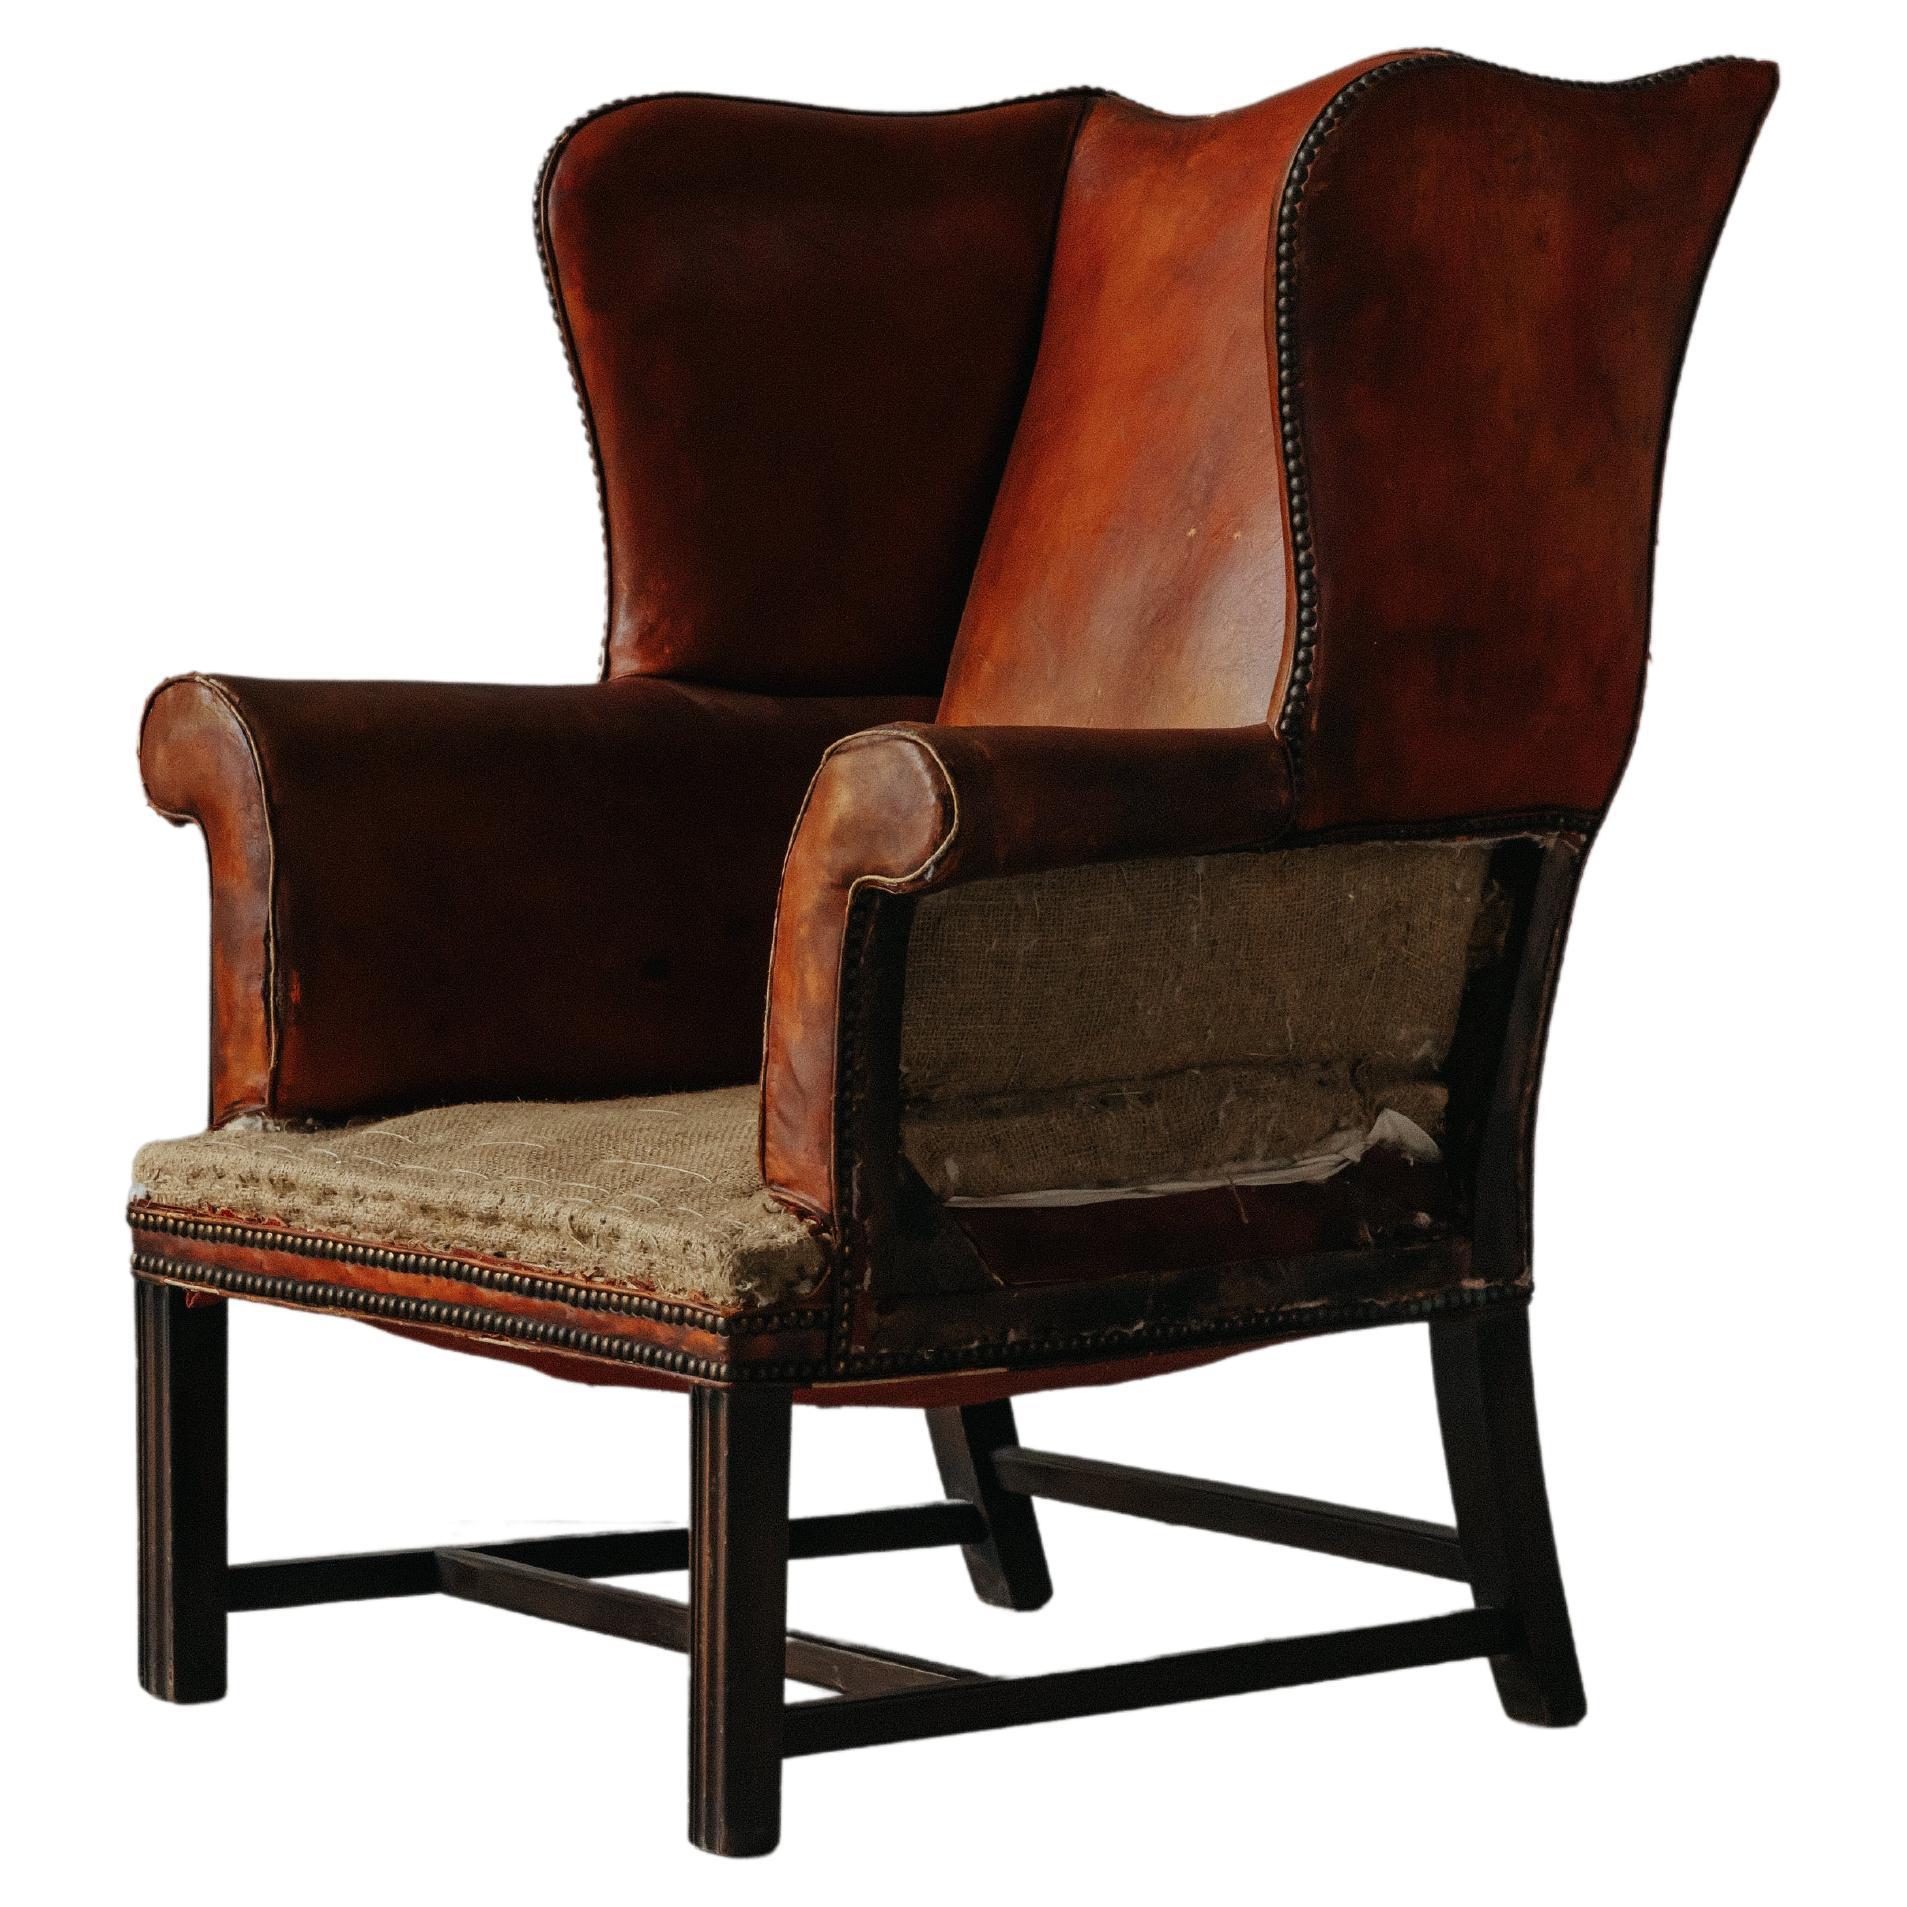 Early Leather Wingback Chair From France, Circa 1930